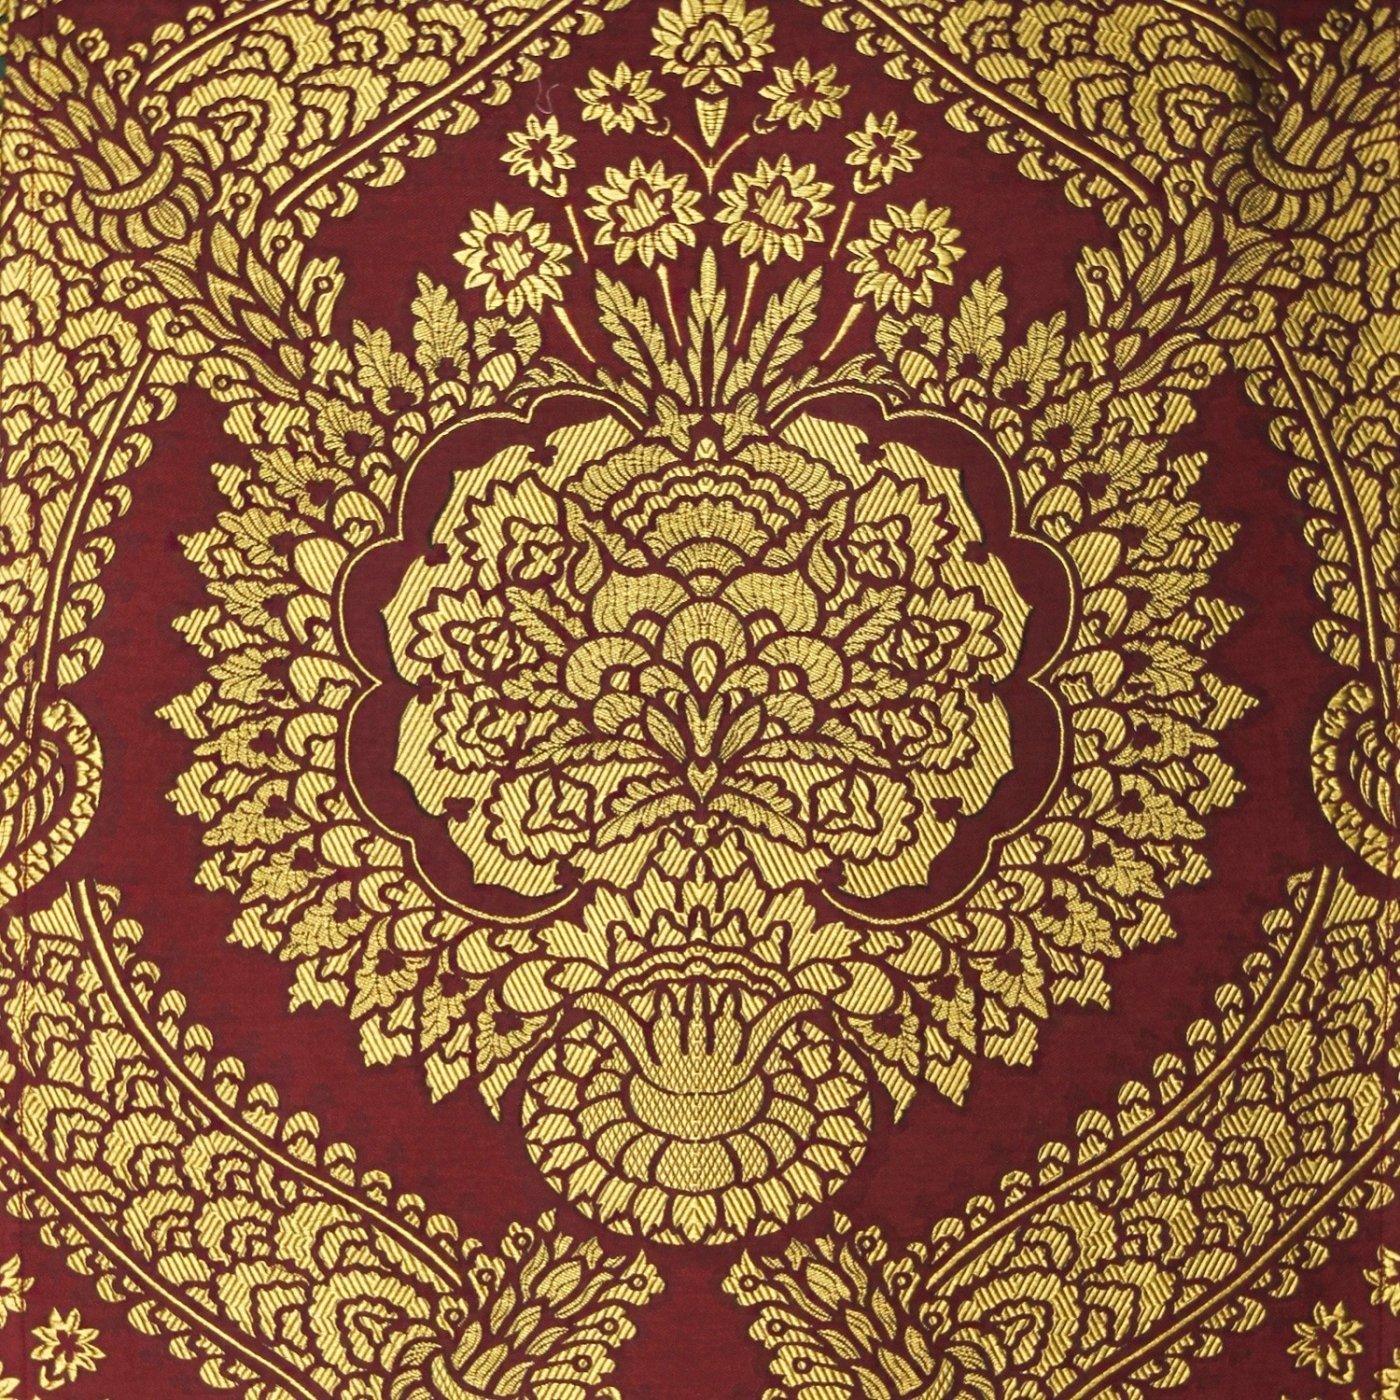 Embroidered Minster Cope in Red/Gold Memlinc with Red Velvet Orphreys - Watts & Co. (international)